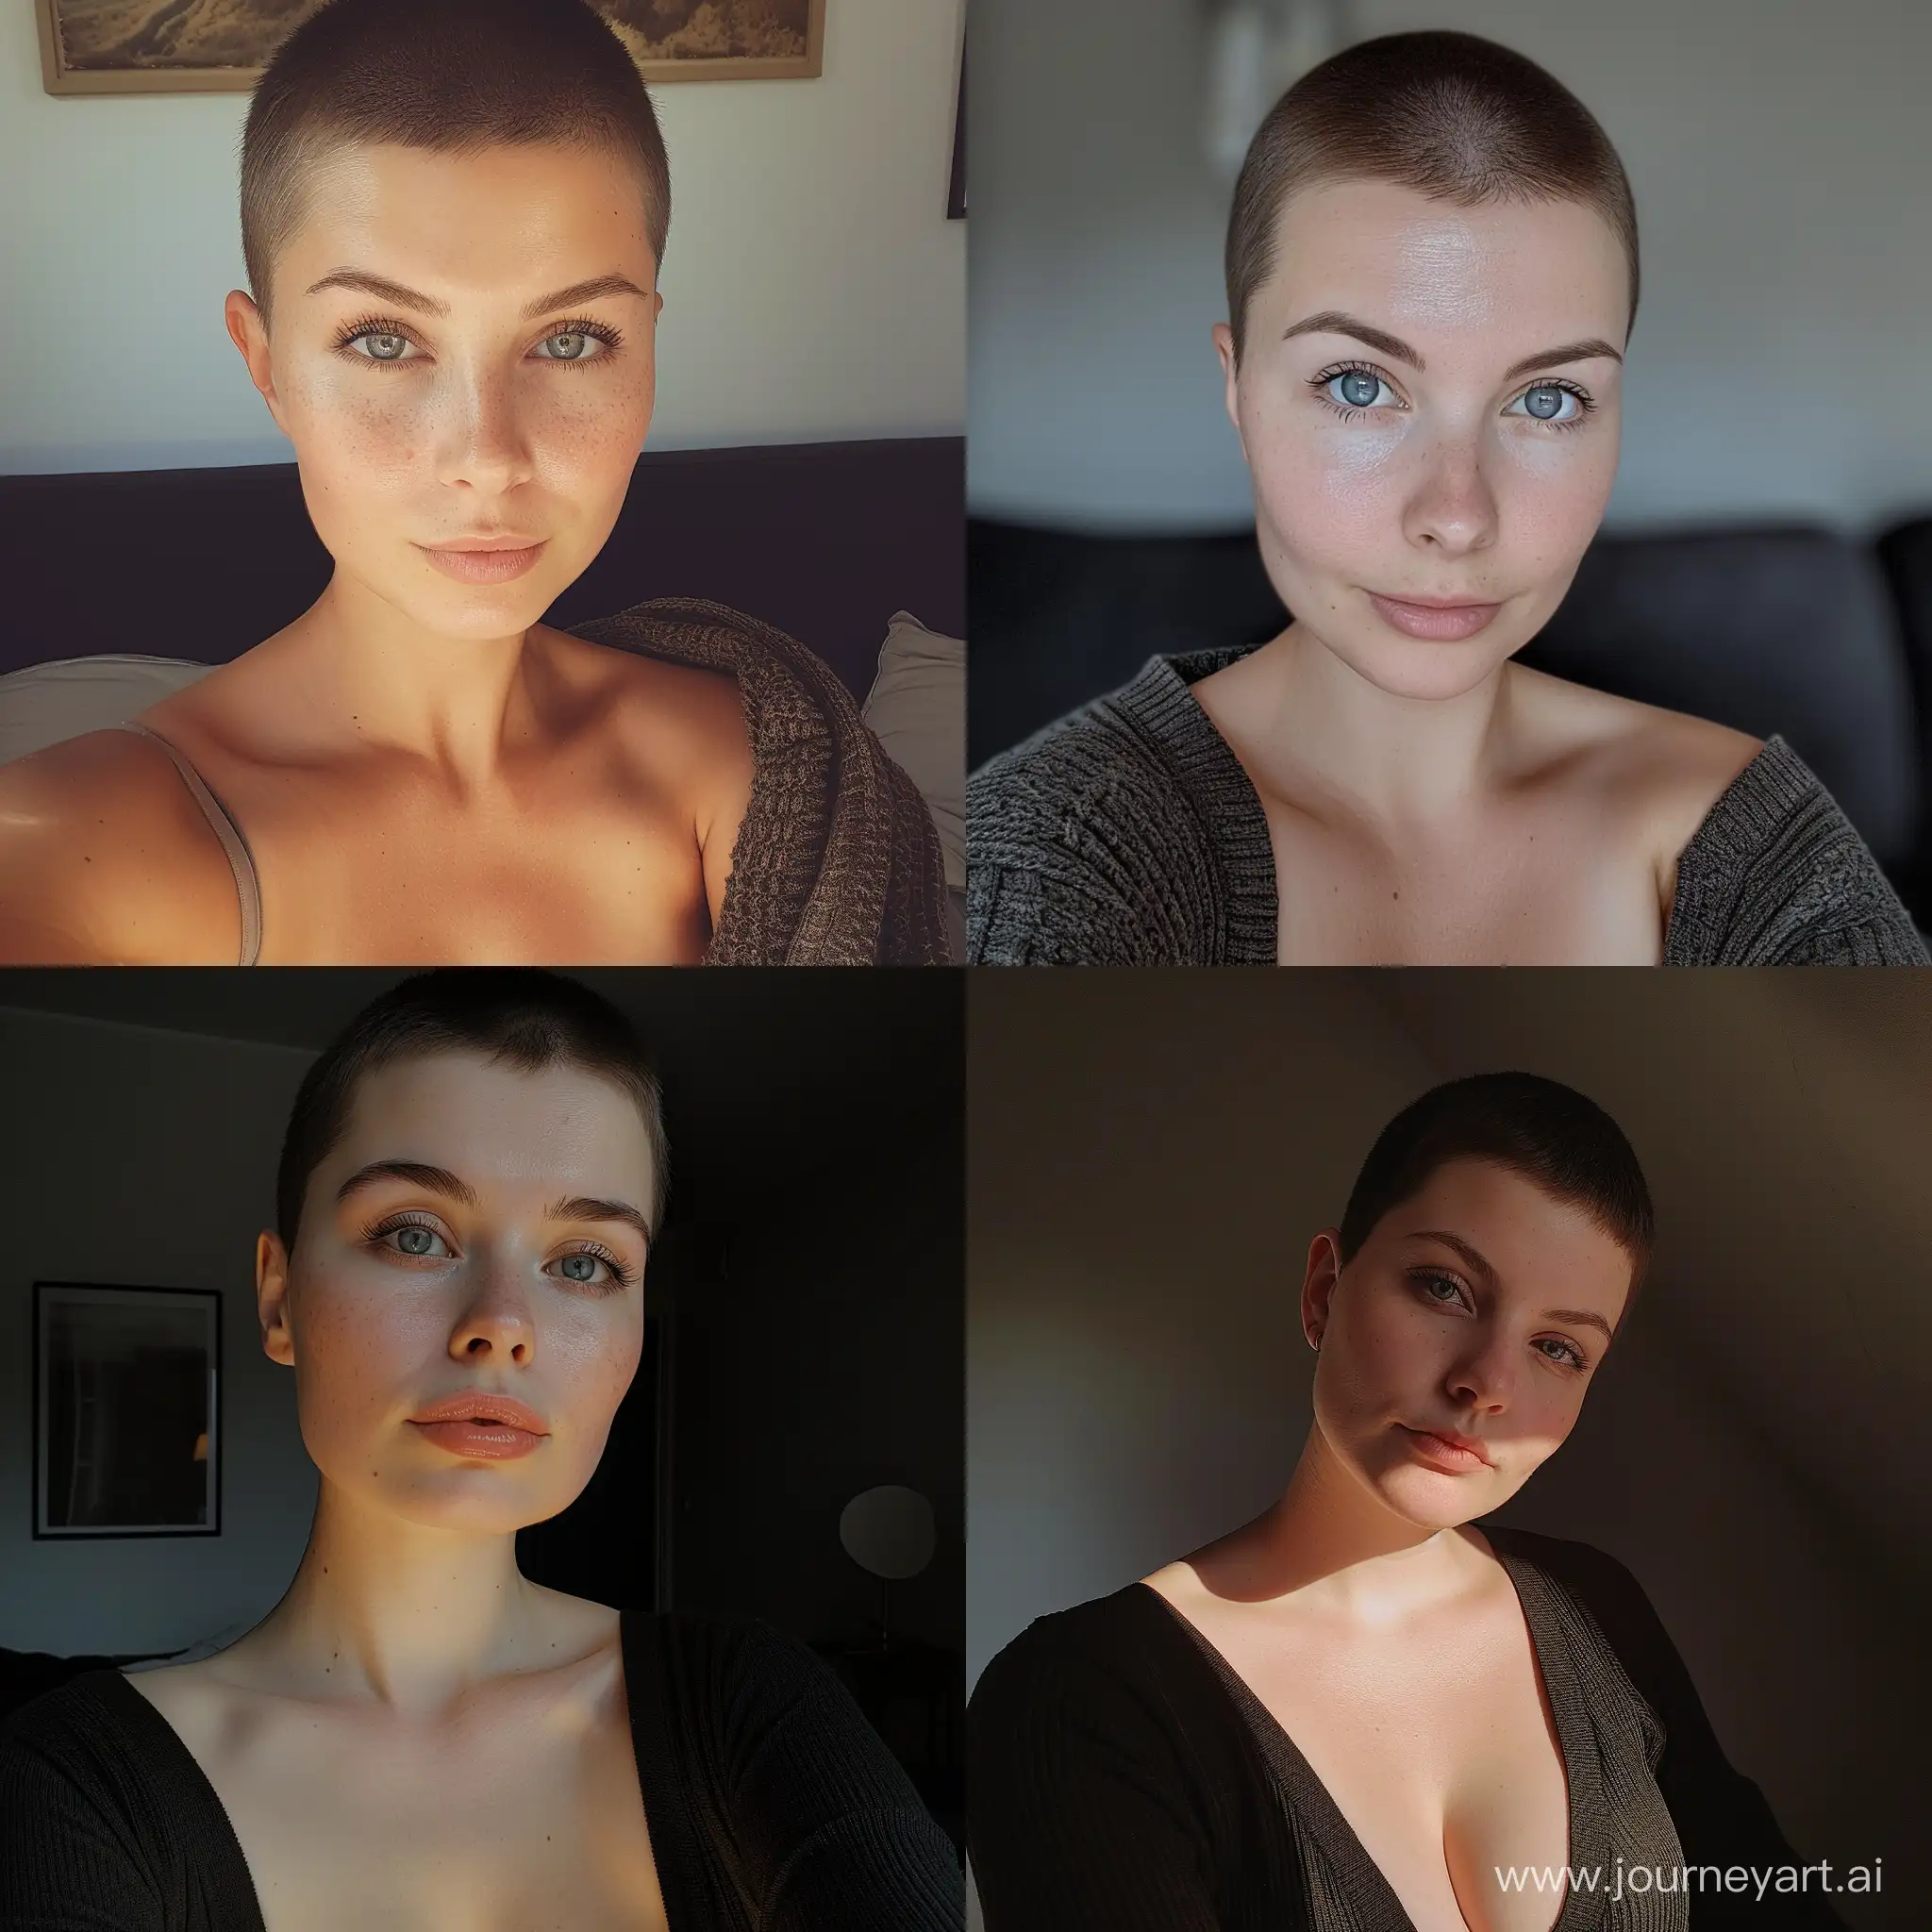 Interior selfie of a woman with short haircut, grey eyes, small breasts, shot on a low camera quality